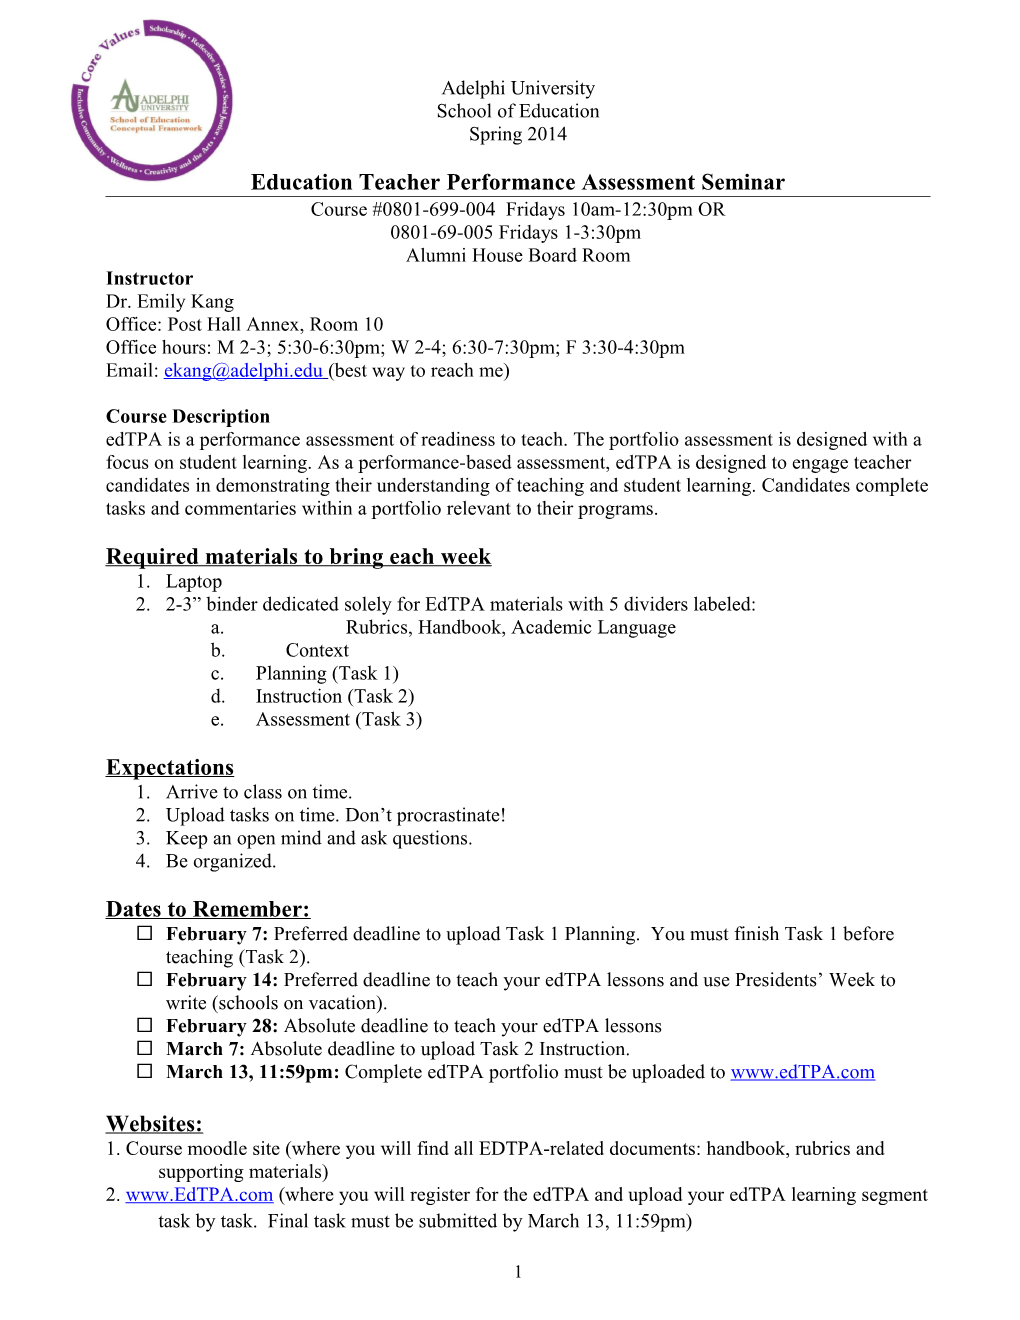 Benchmark Assignment for Science Methods 0836-404